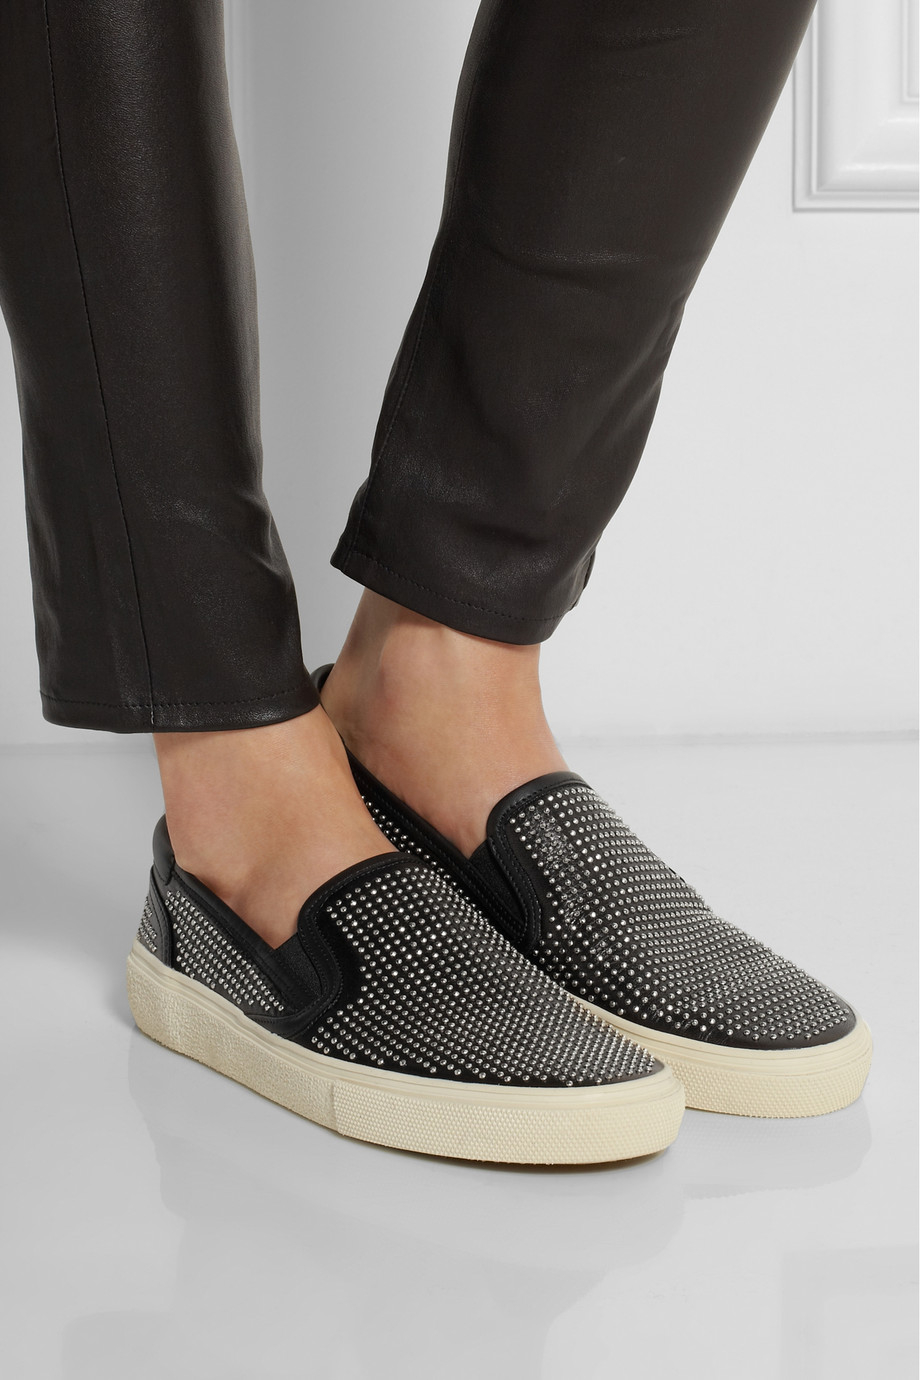 Lyst - Saint Laurent Studded Leather Slip-On Sneakers in Black